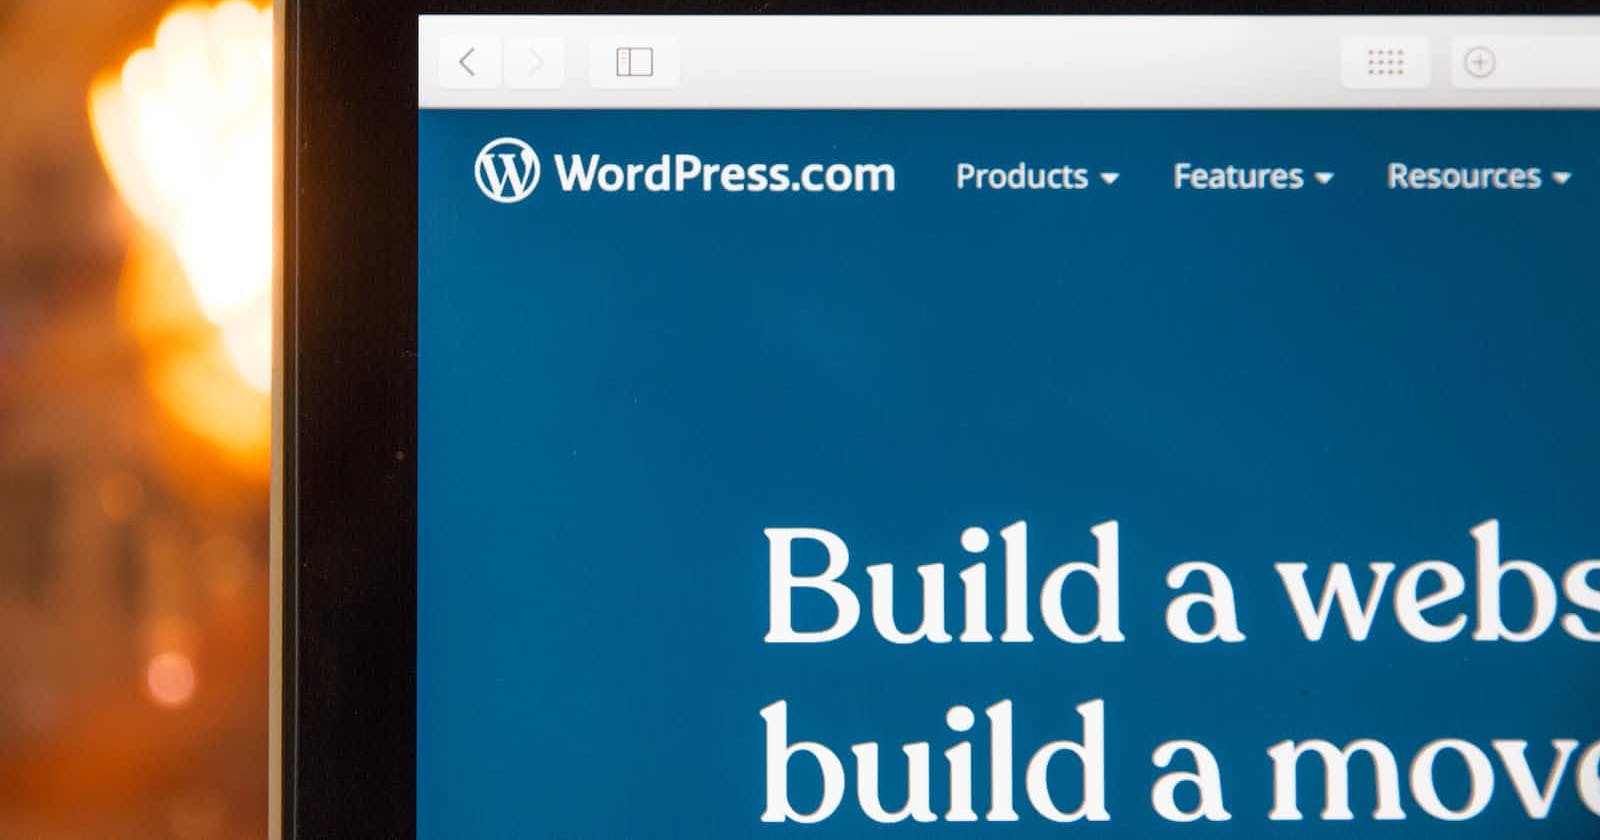 I want to migrate my website built in WordPress into AWS Lightsail. How can I do that easily?